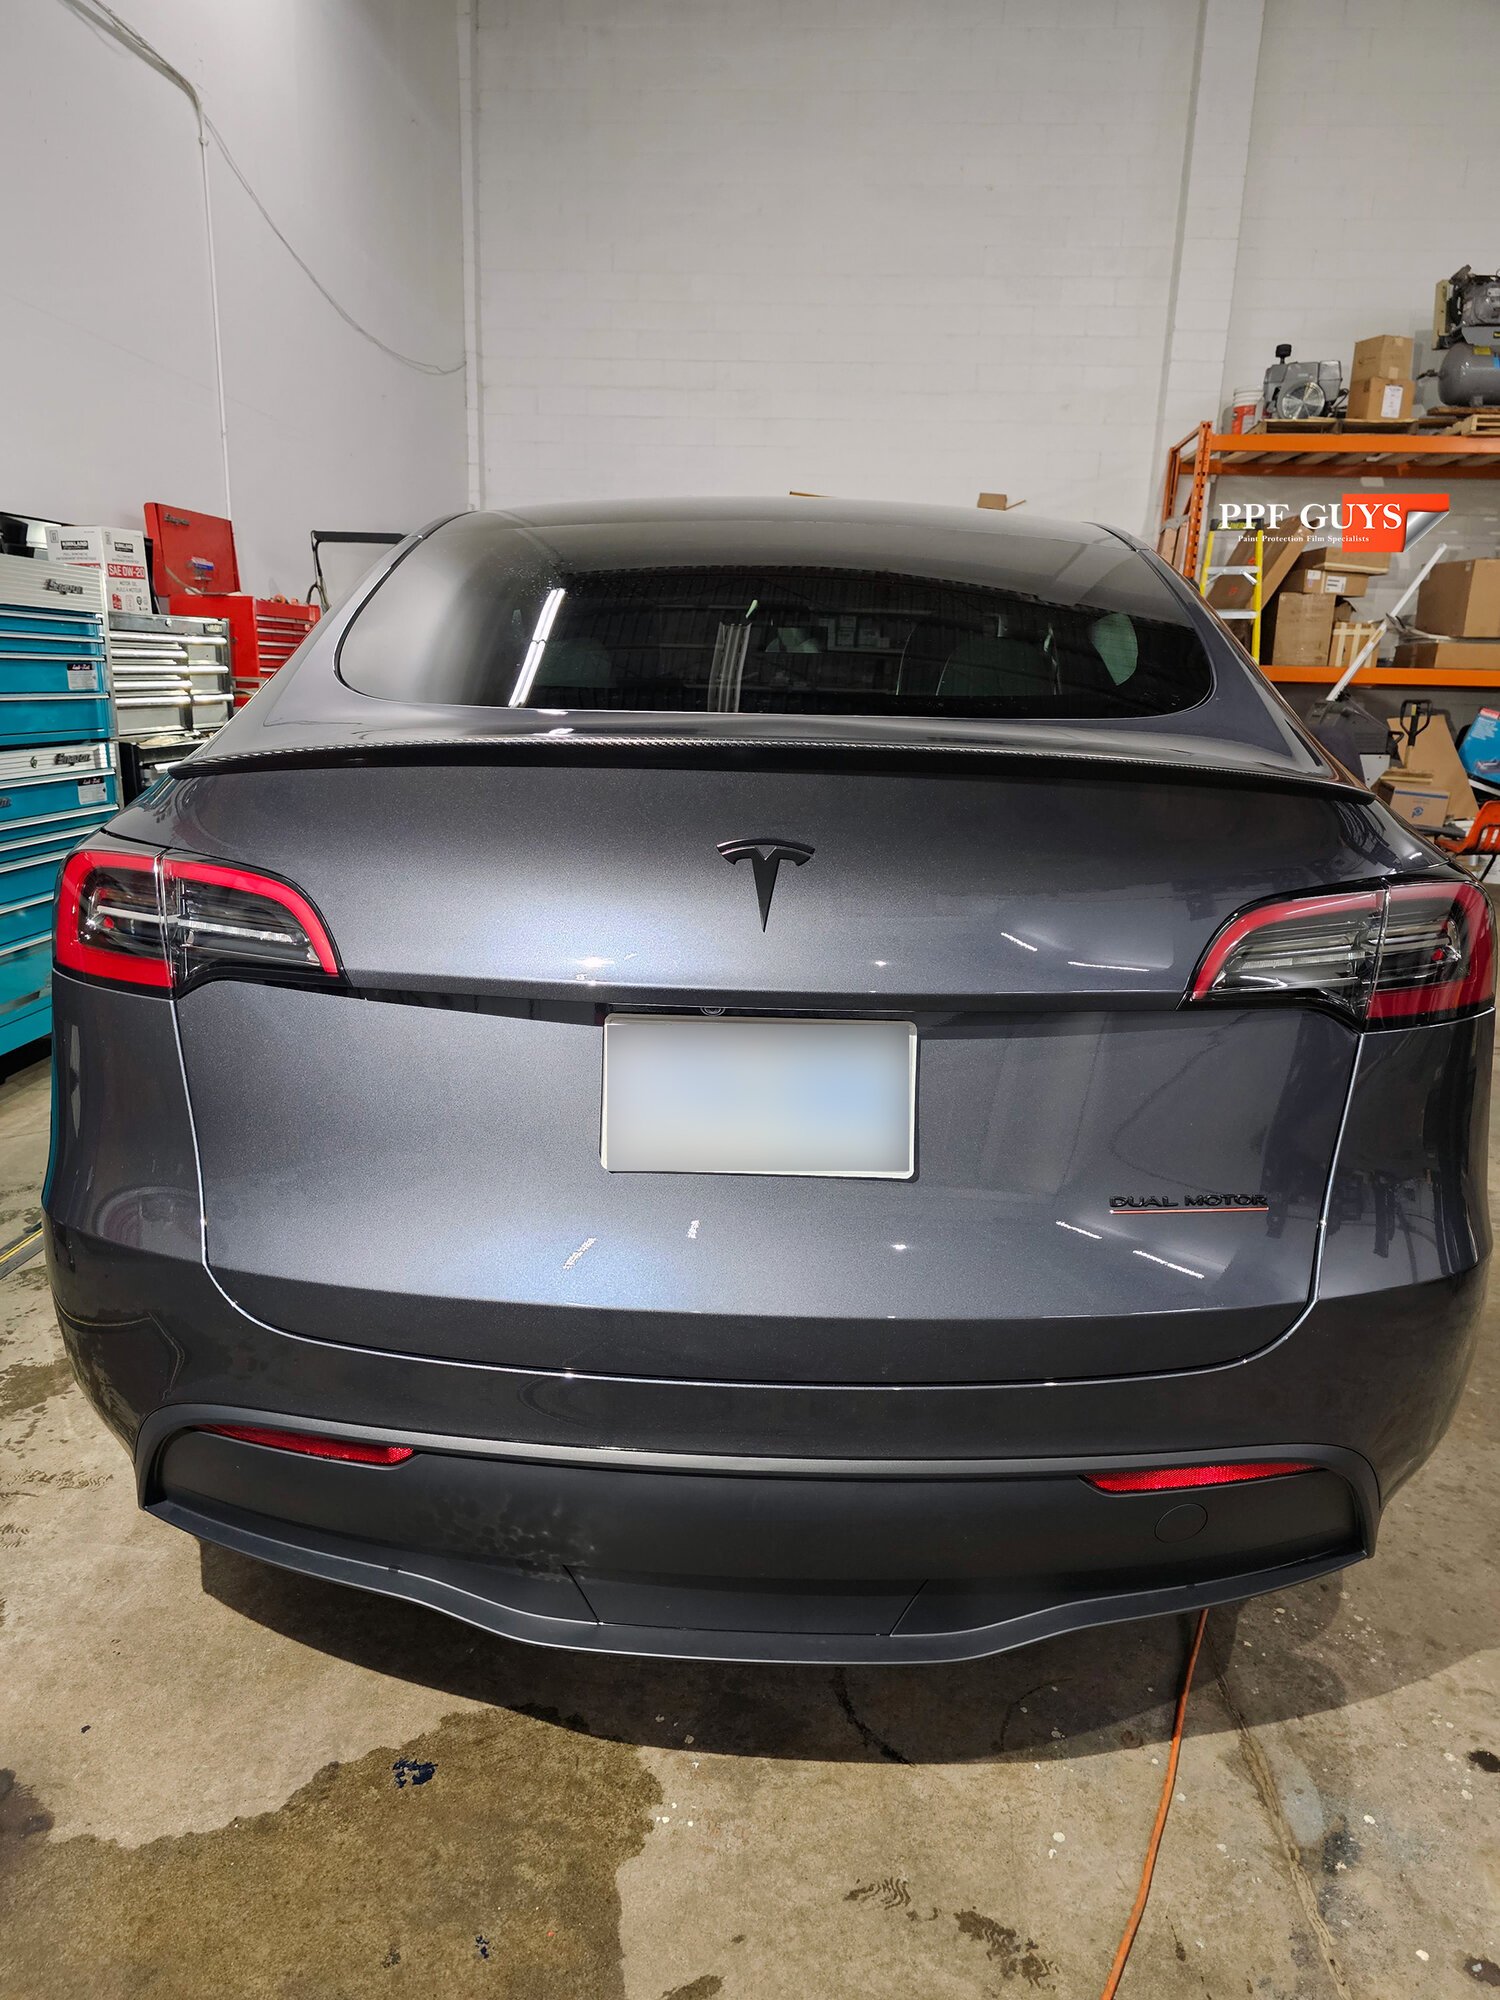 PPF Guys Model Y Silver Full Body Ultimate Fusion, blacked out emblems (44).jpg